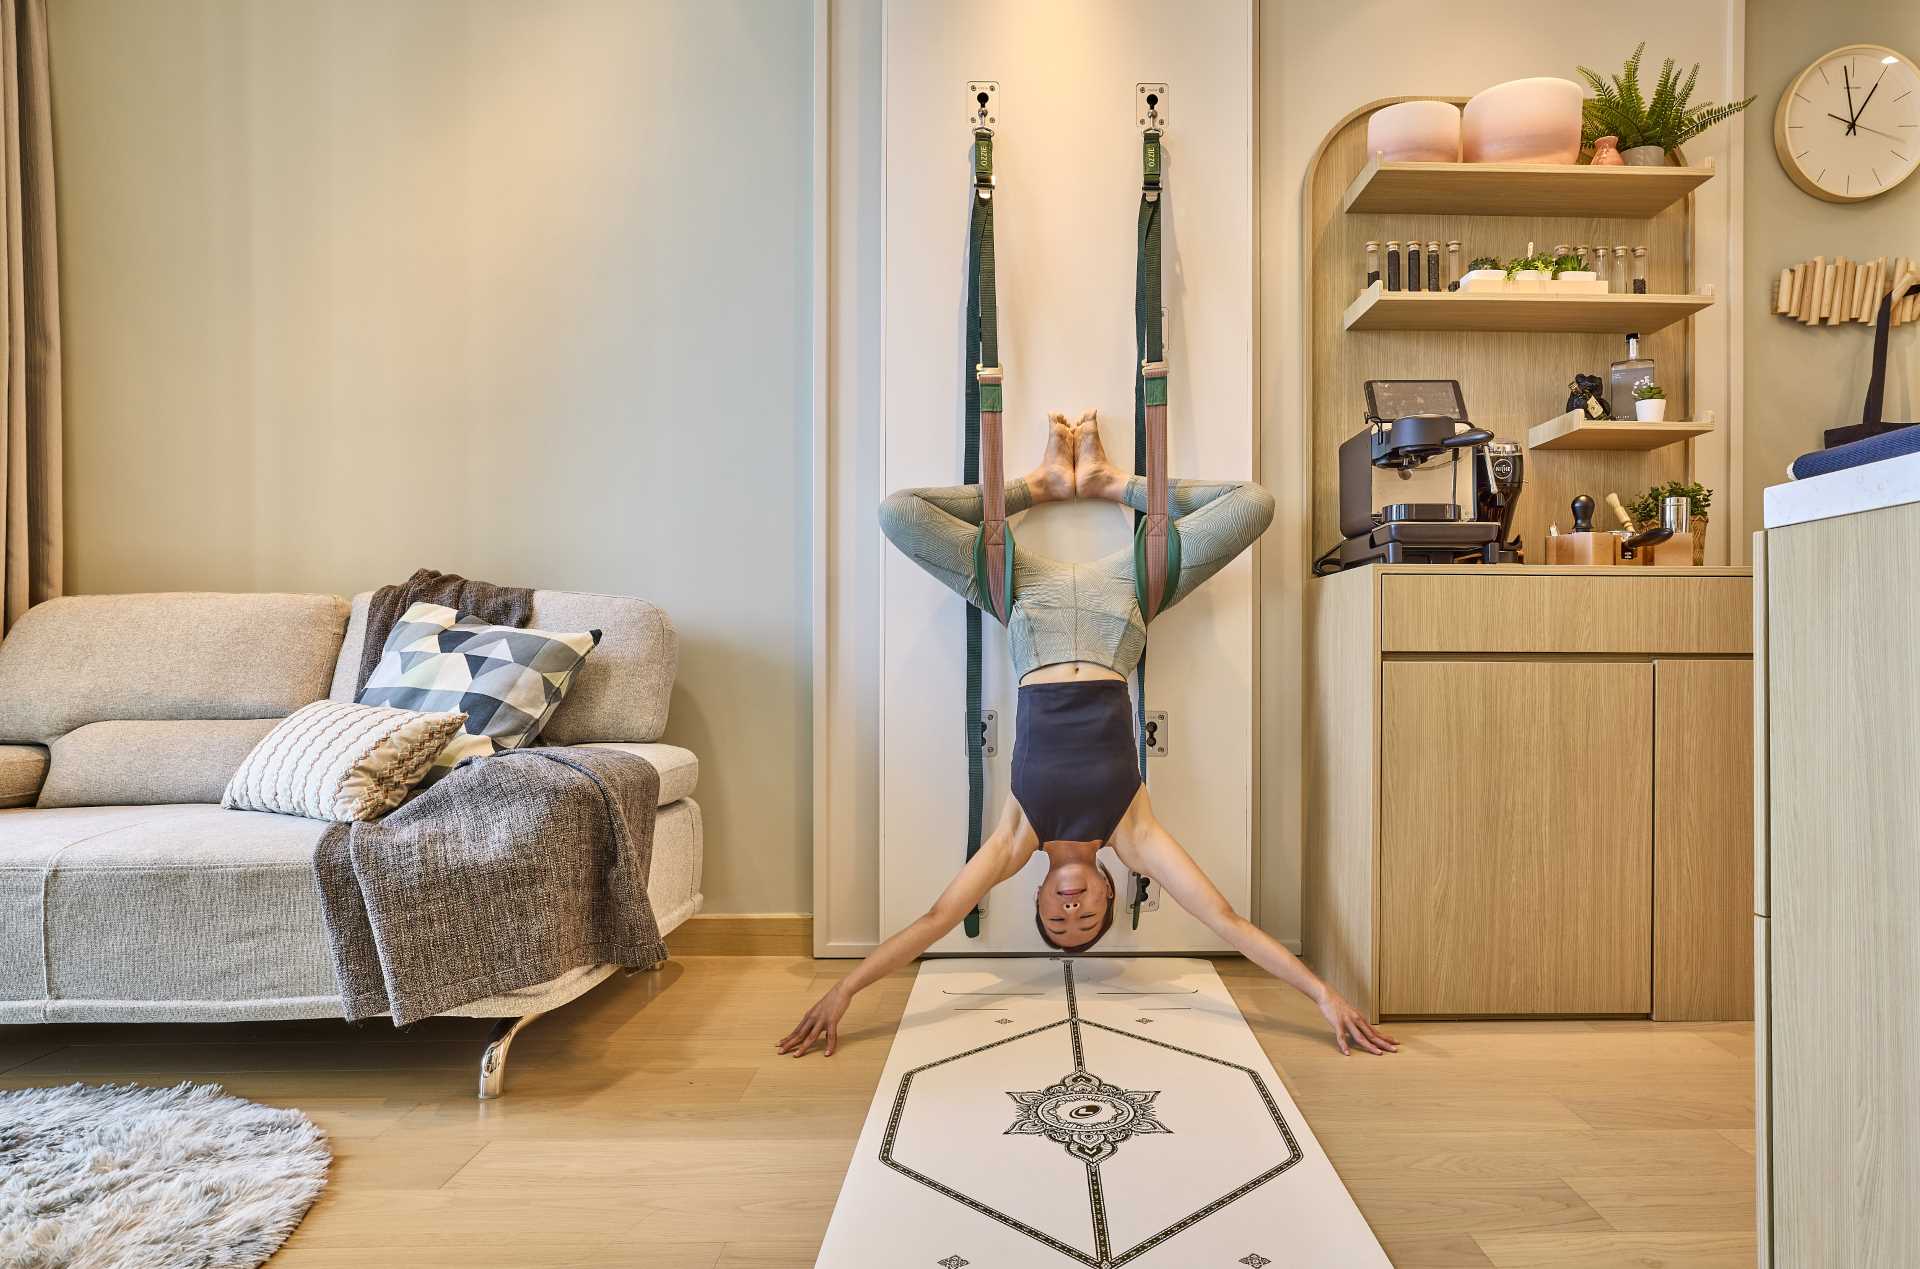 This Small Apartment Has A Yoga Wall And A Coffee Bar - ᐅ